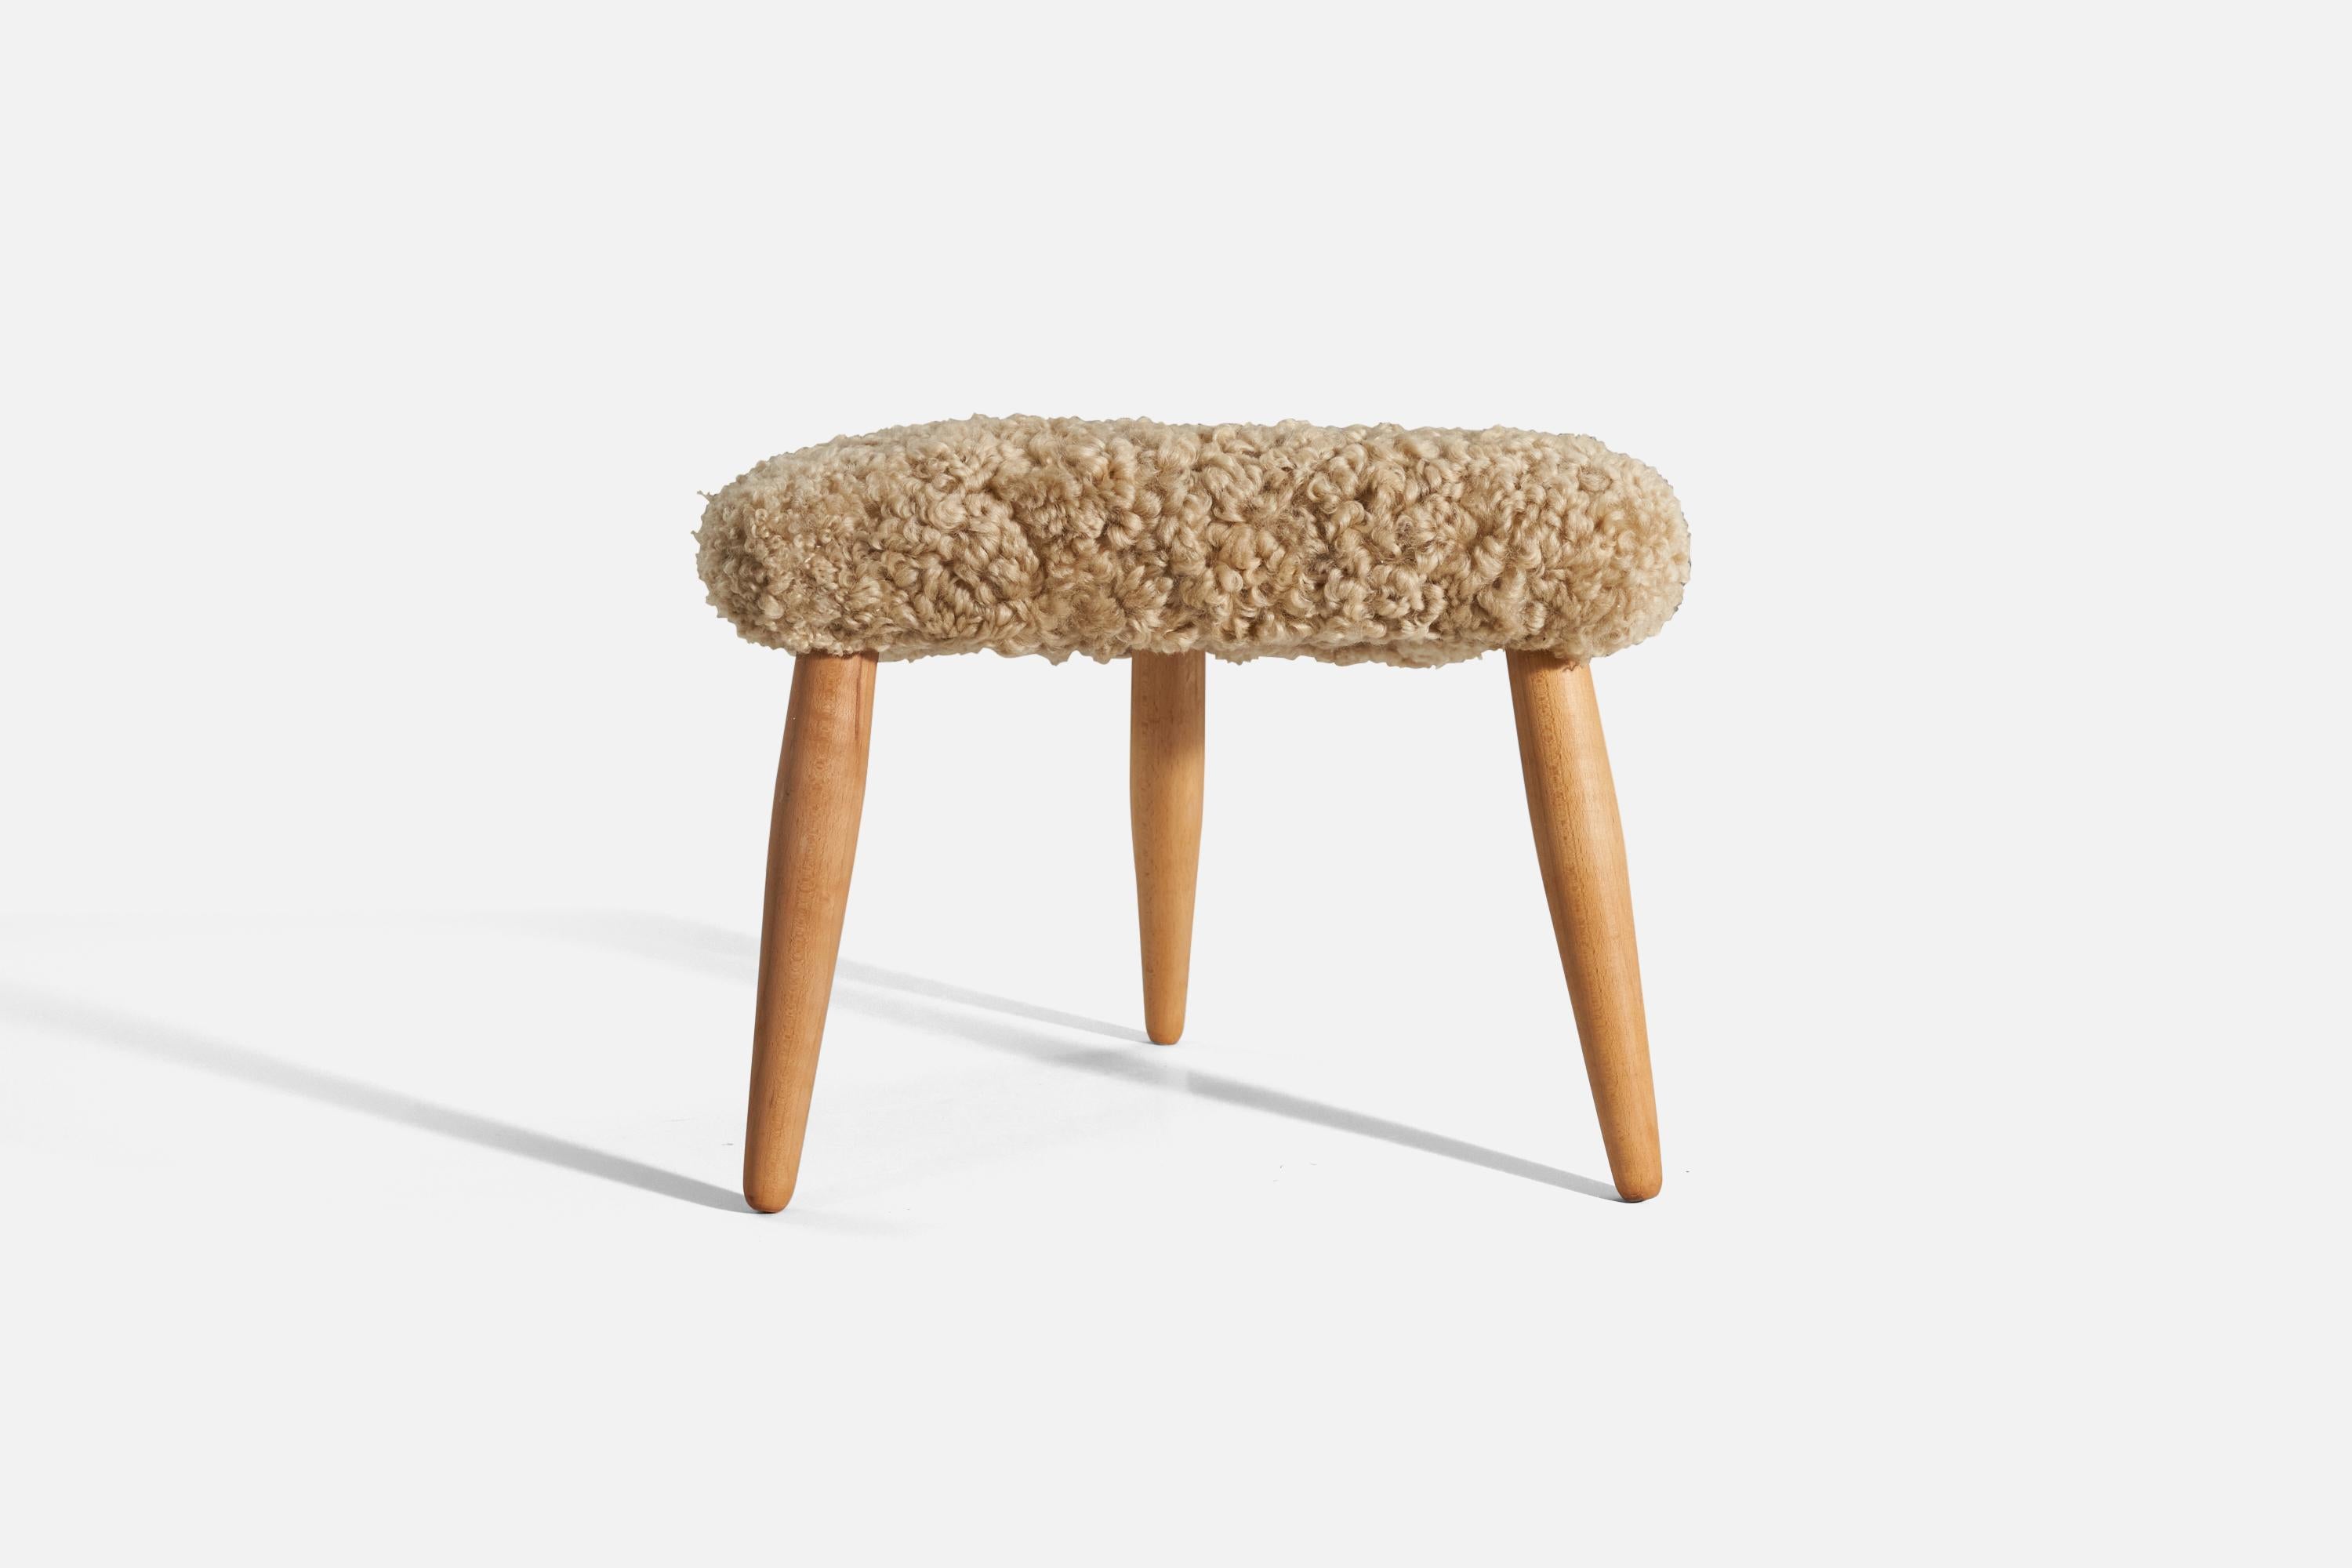 Mid-Century Modern Arnold Madsen, Stool, Wood, Shearling, Sweden, 1950s For Sale